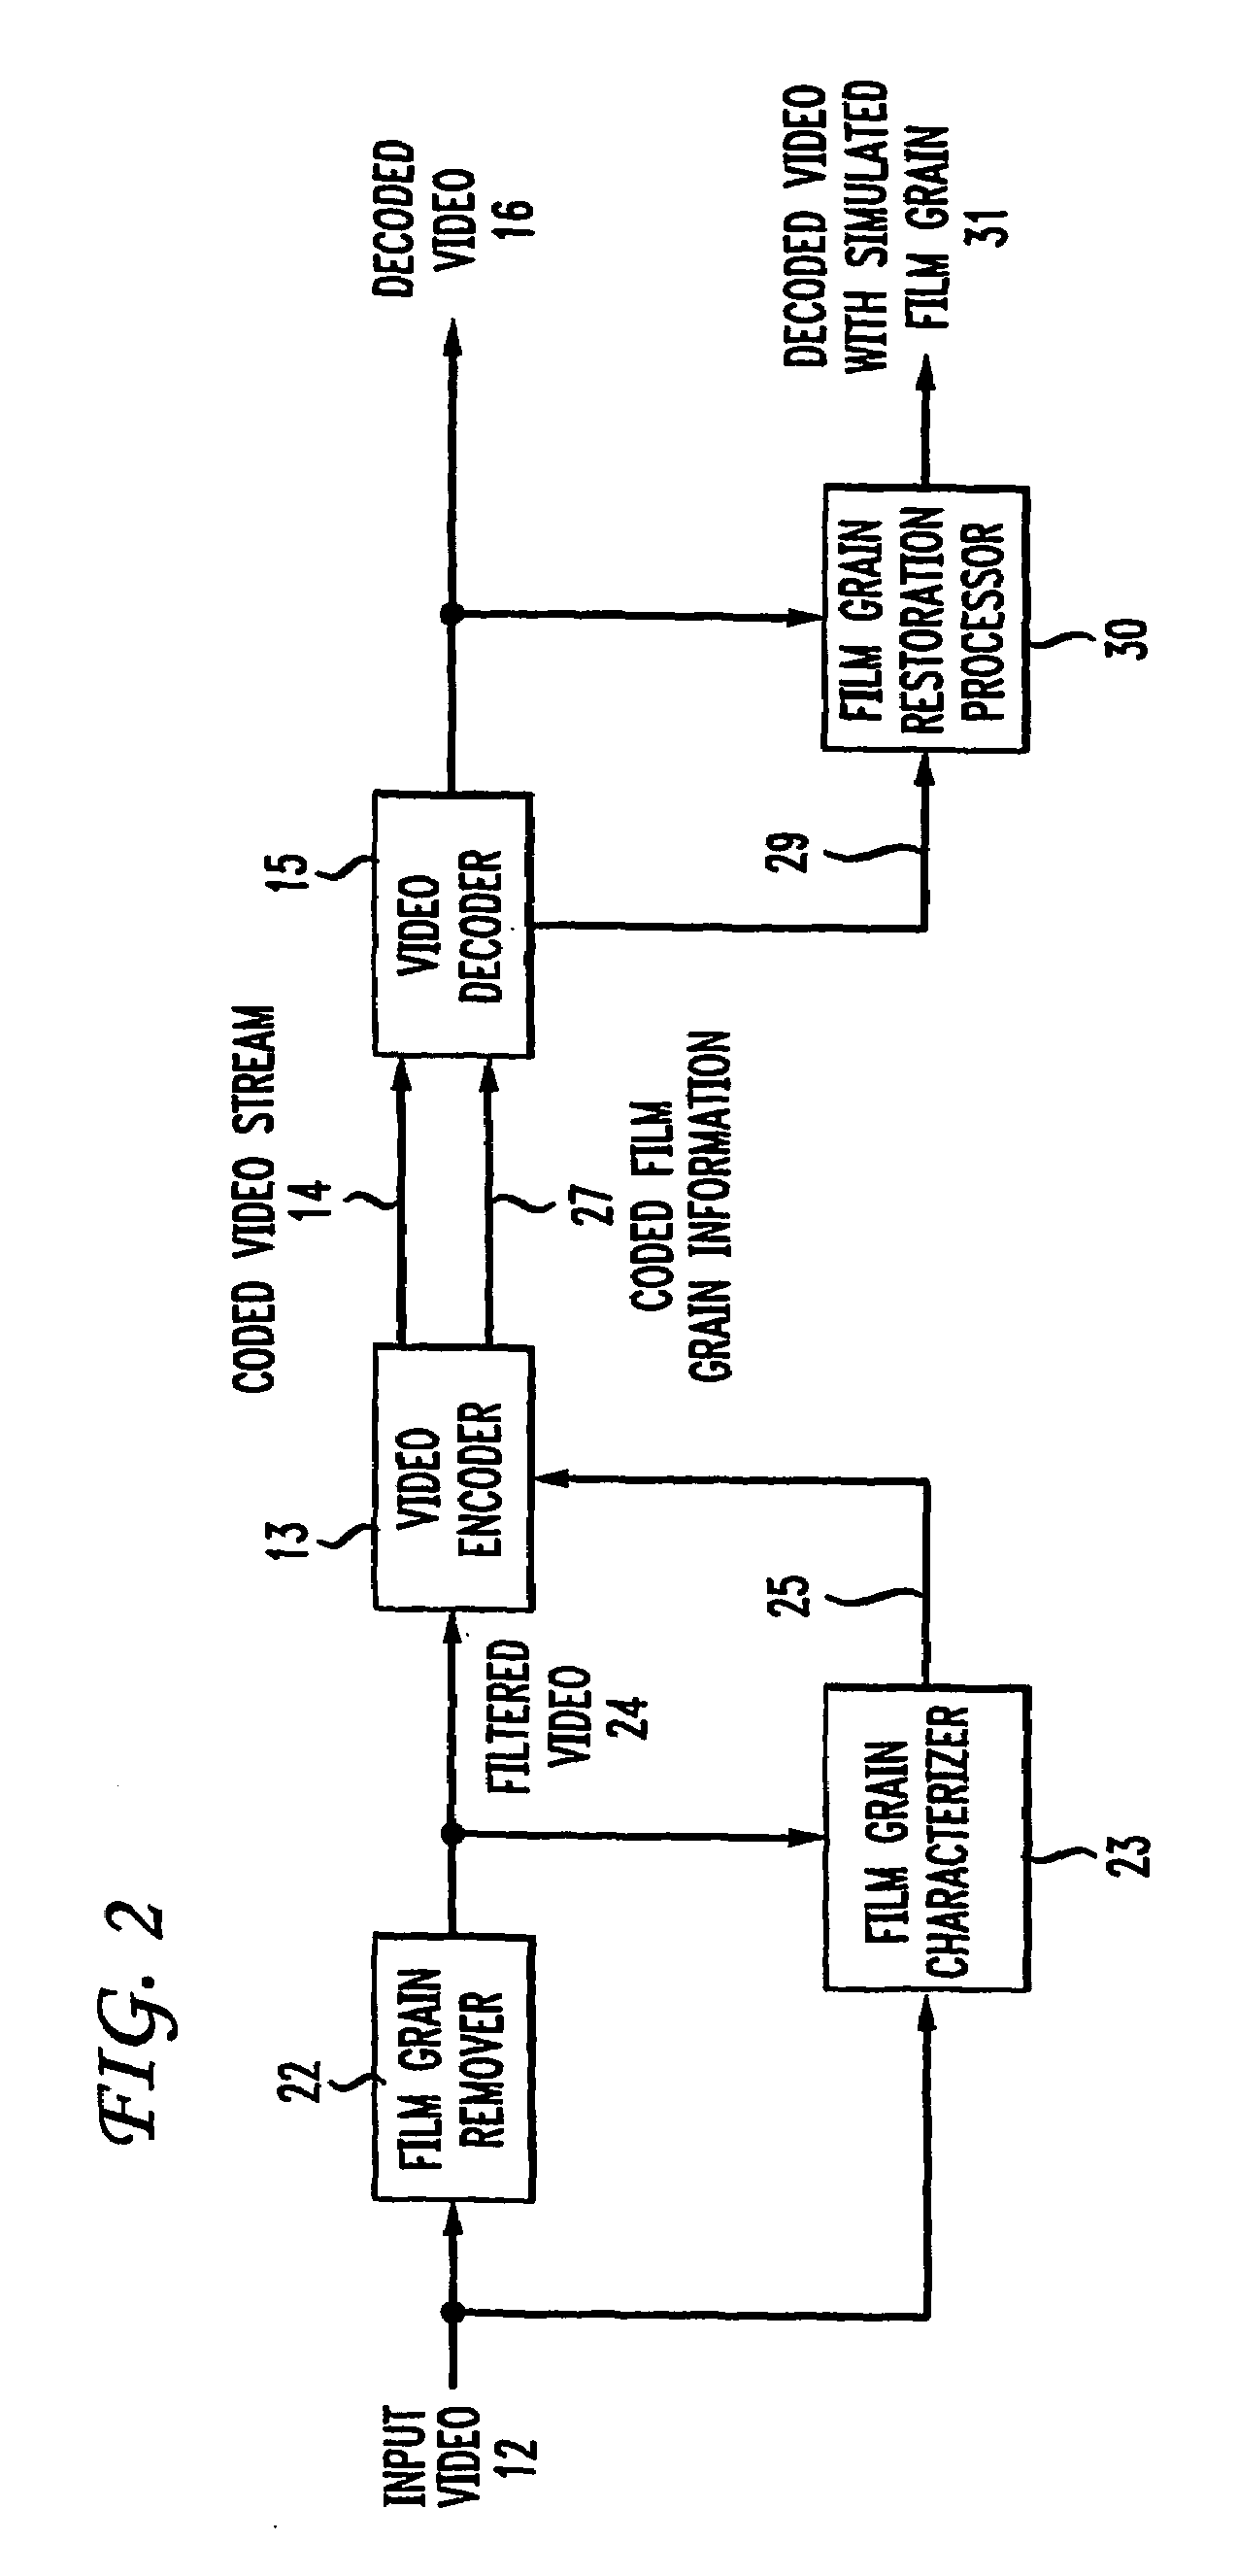 Method and apparatus for representing image granularity by one or more parameters